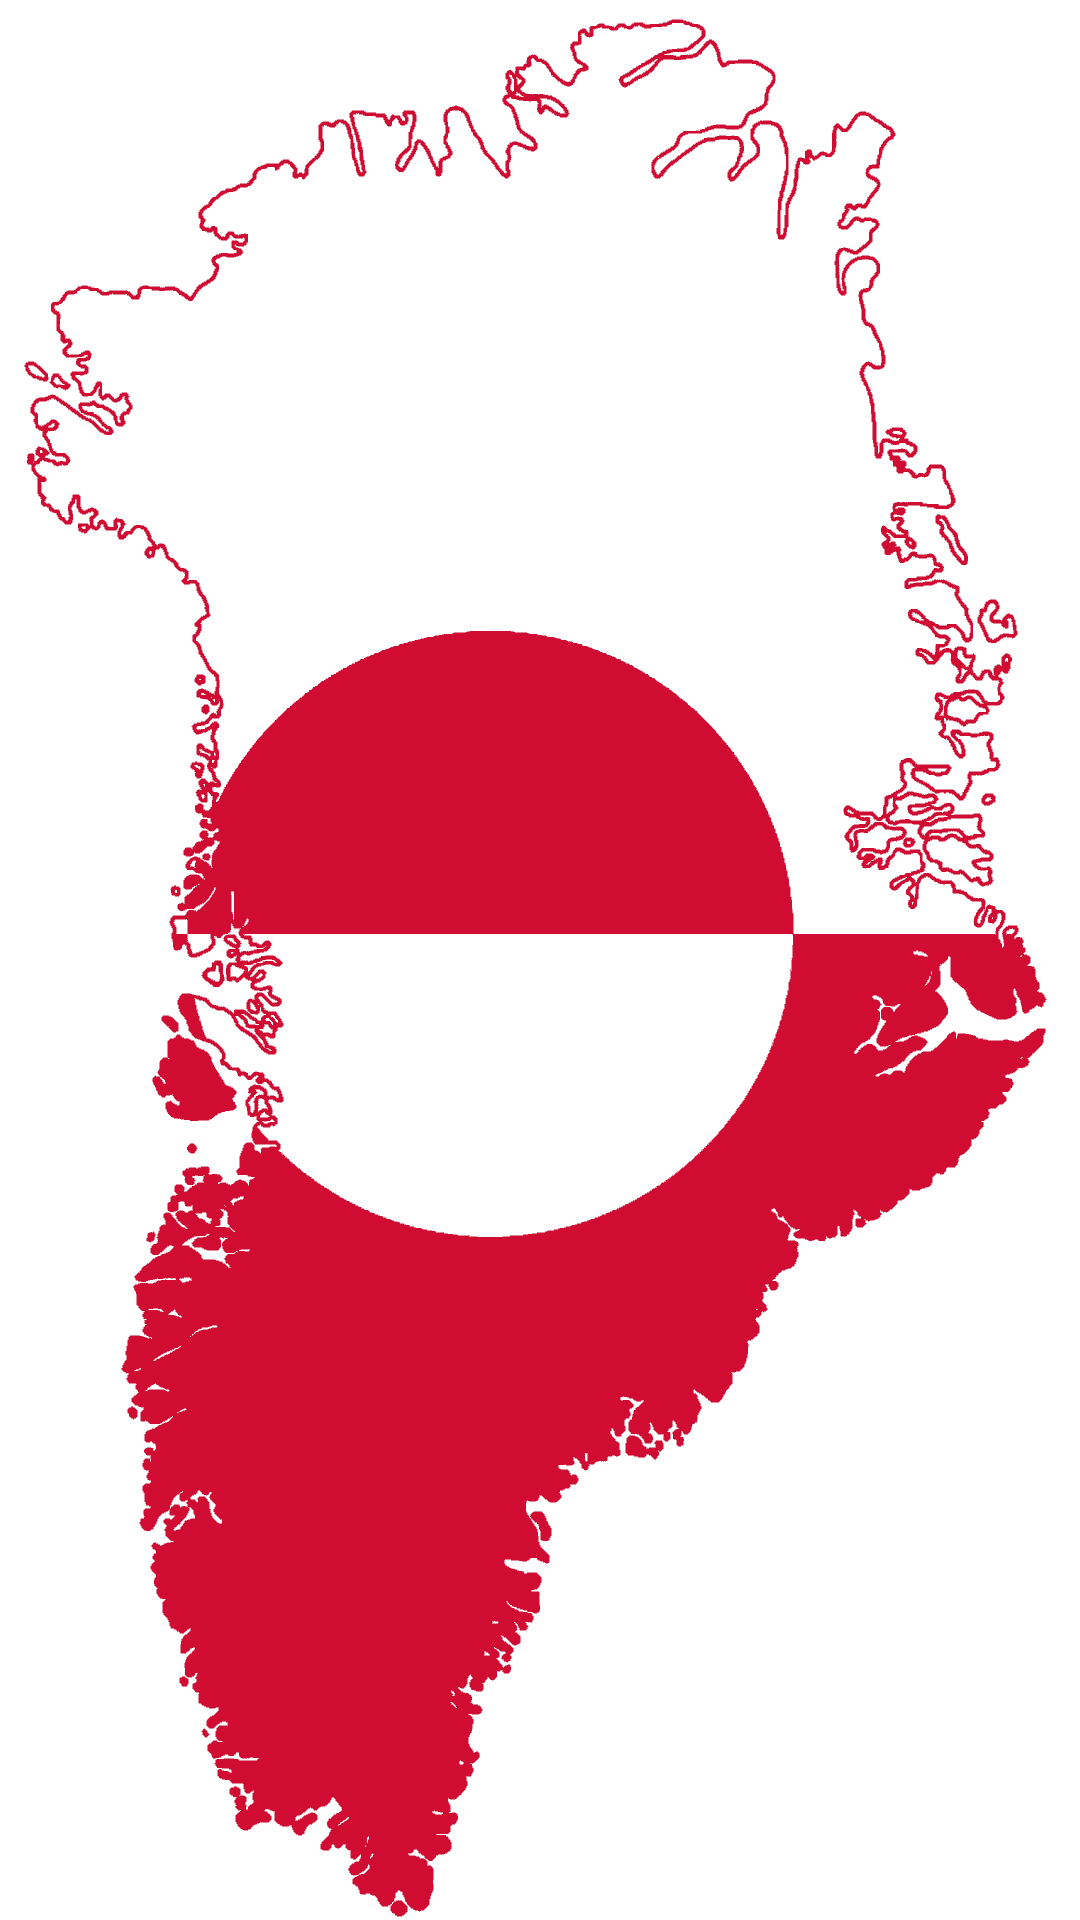 Flag map of Greenland